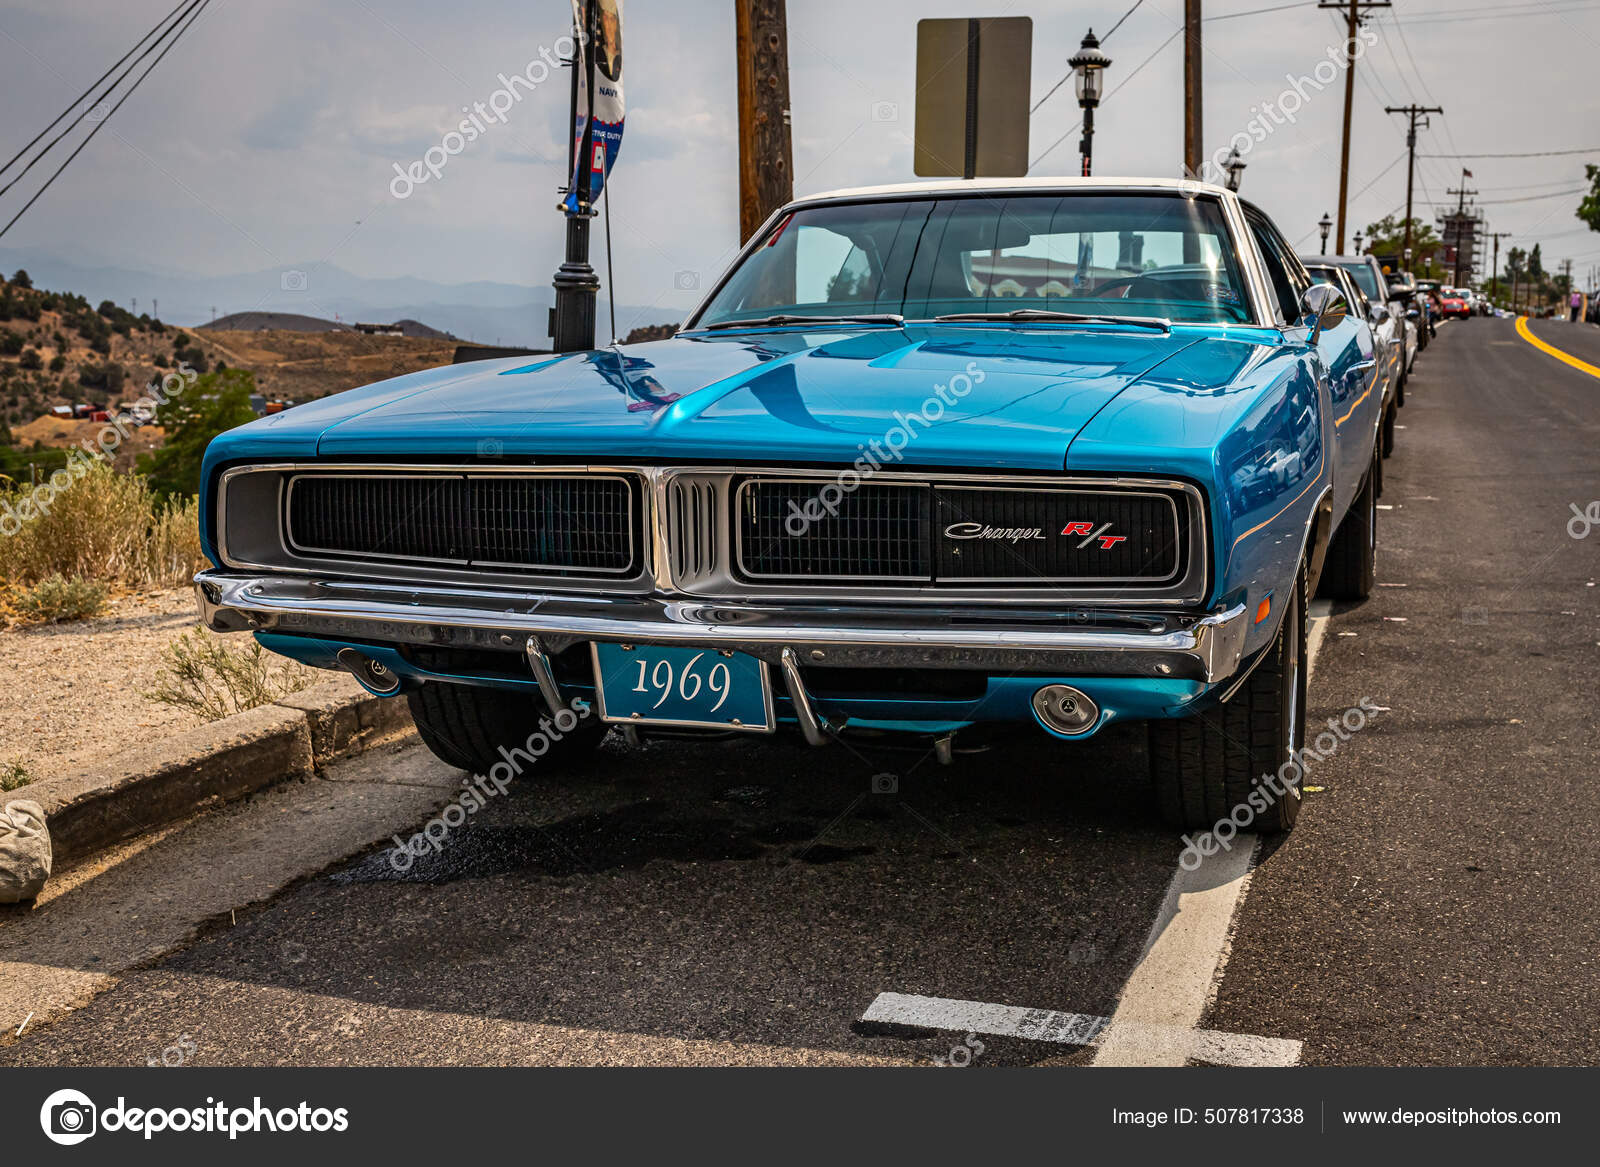 Dodge charger 1969 Stock Photos, Royalty Free Dodge charger 1969 Images |  Depositphotos